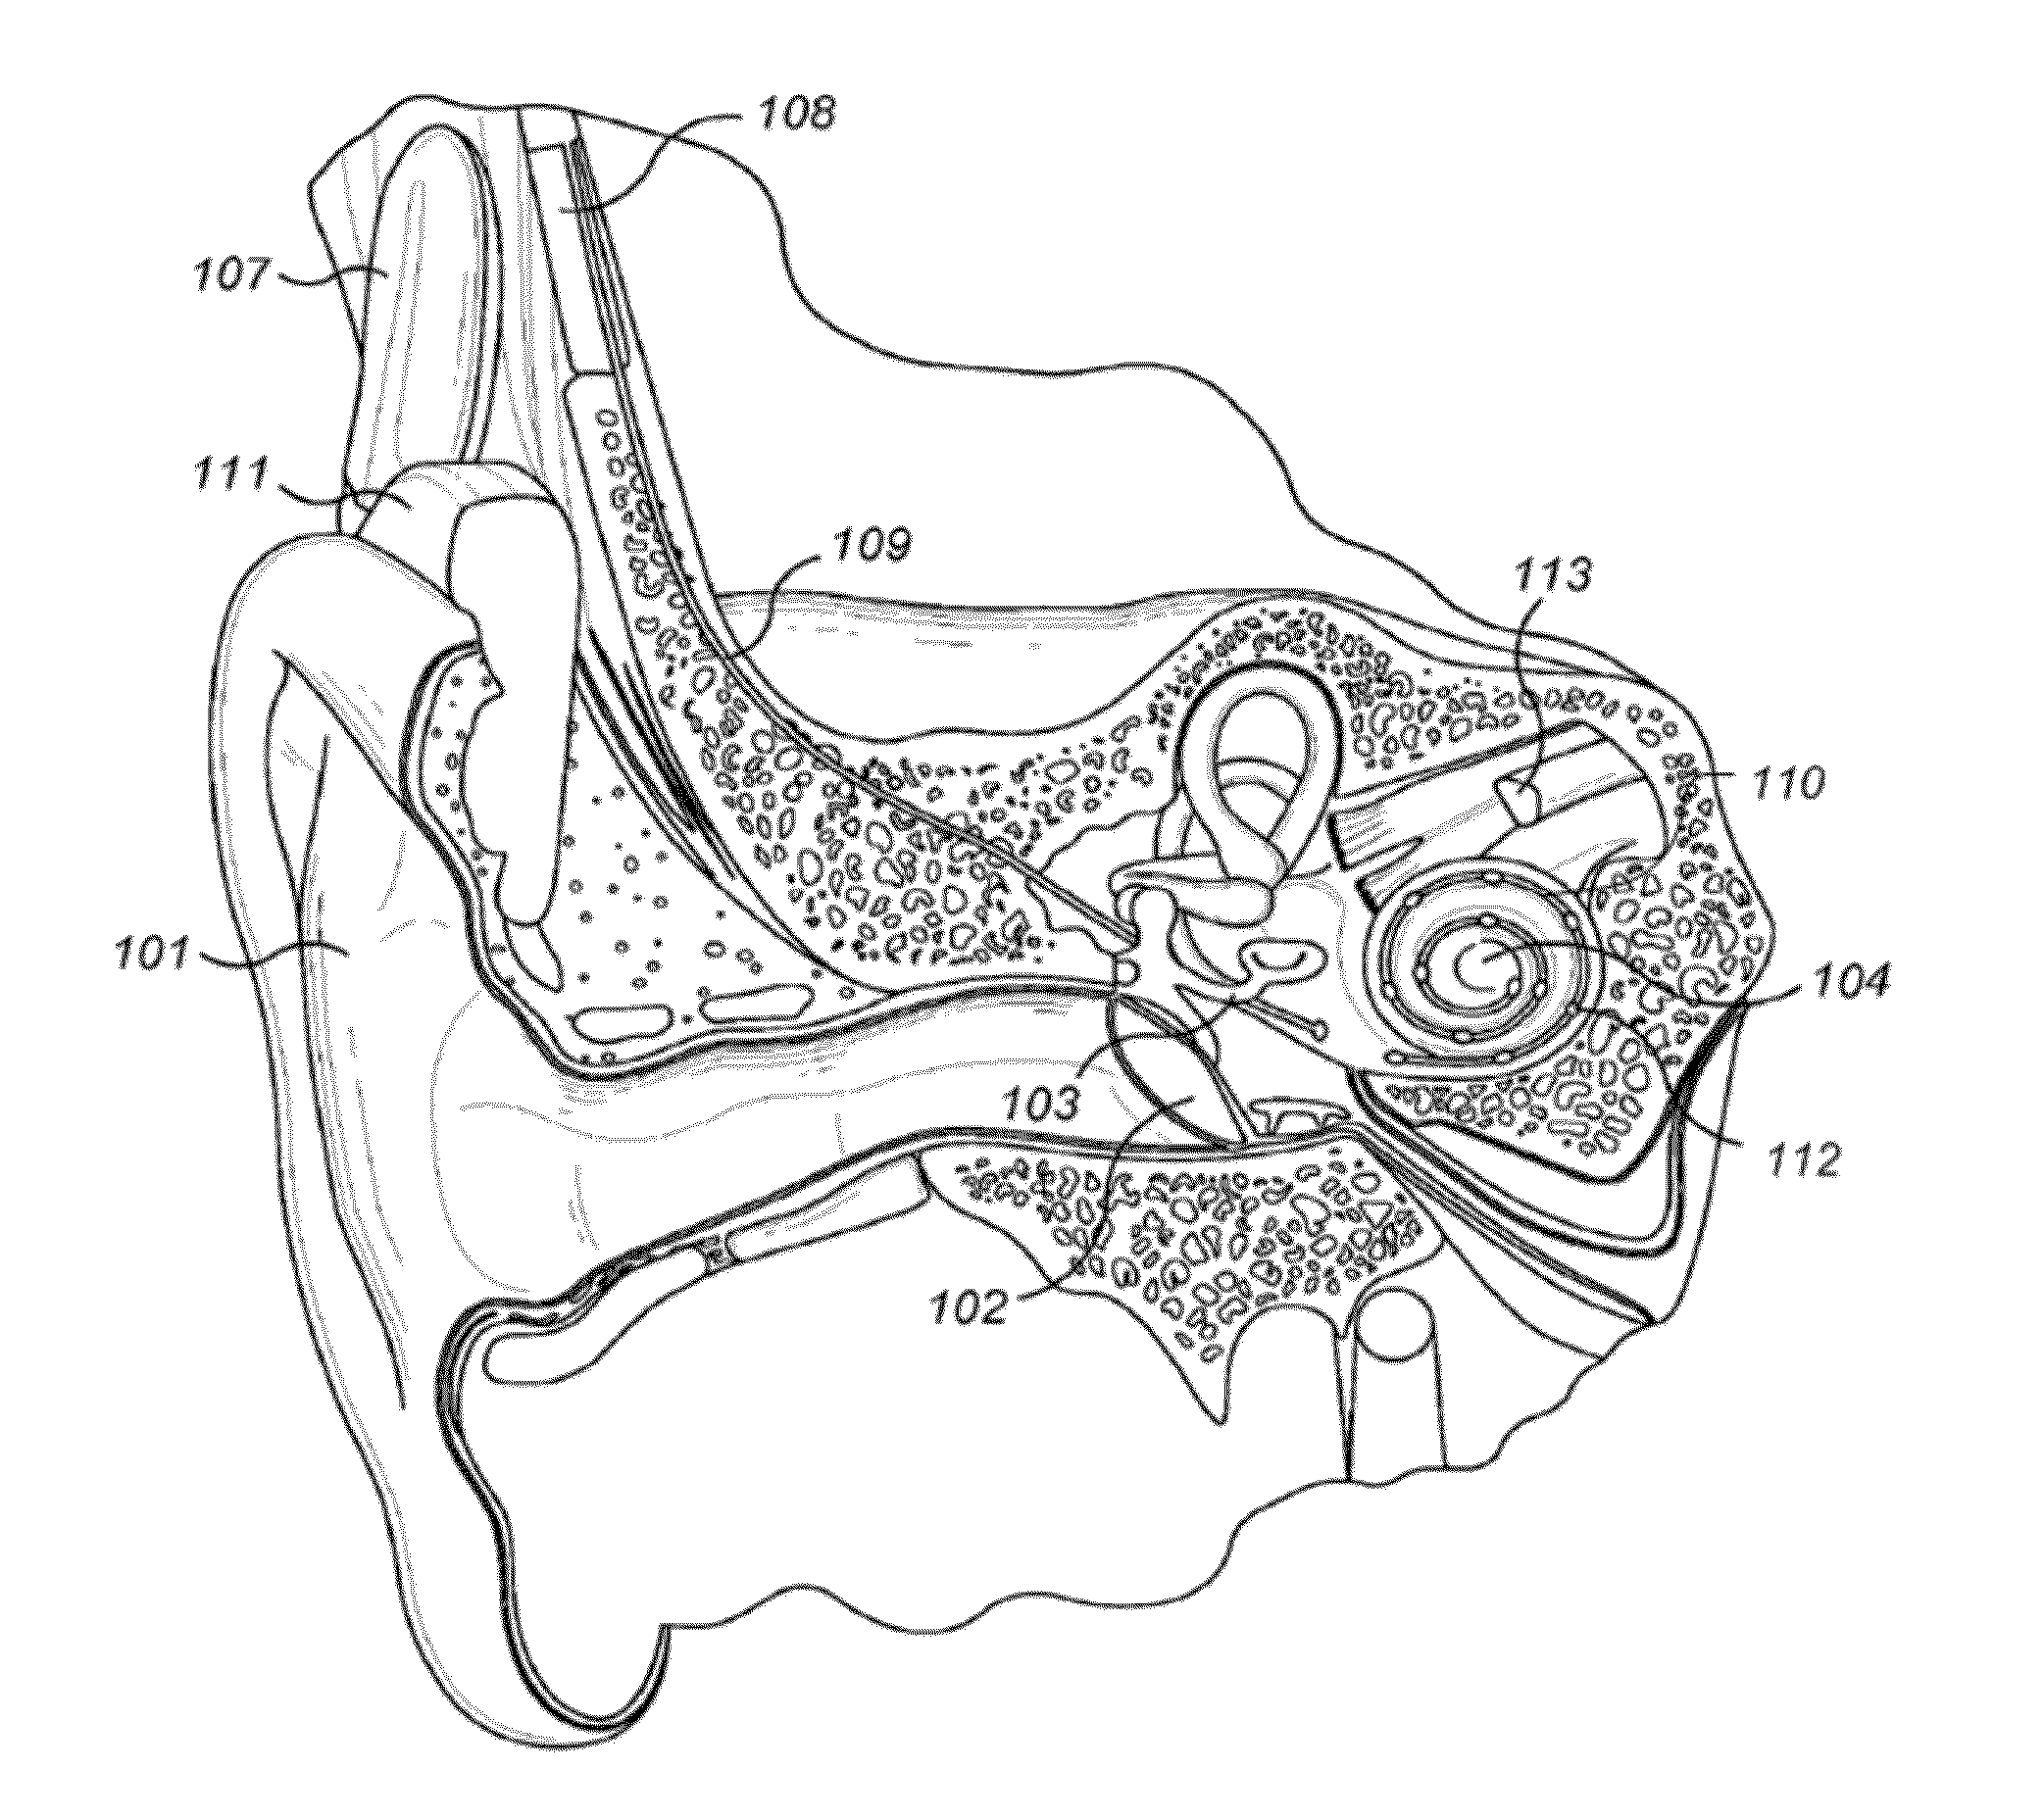 Reduction of Transient Sounds in Hearing Implants